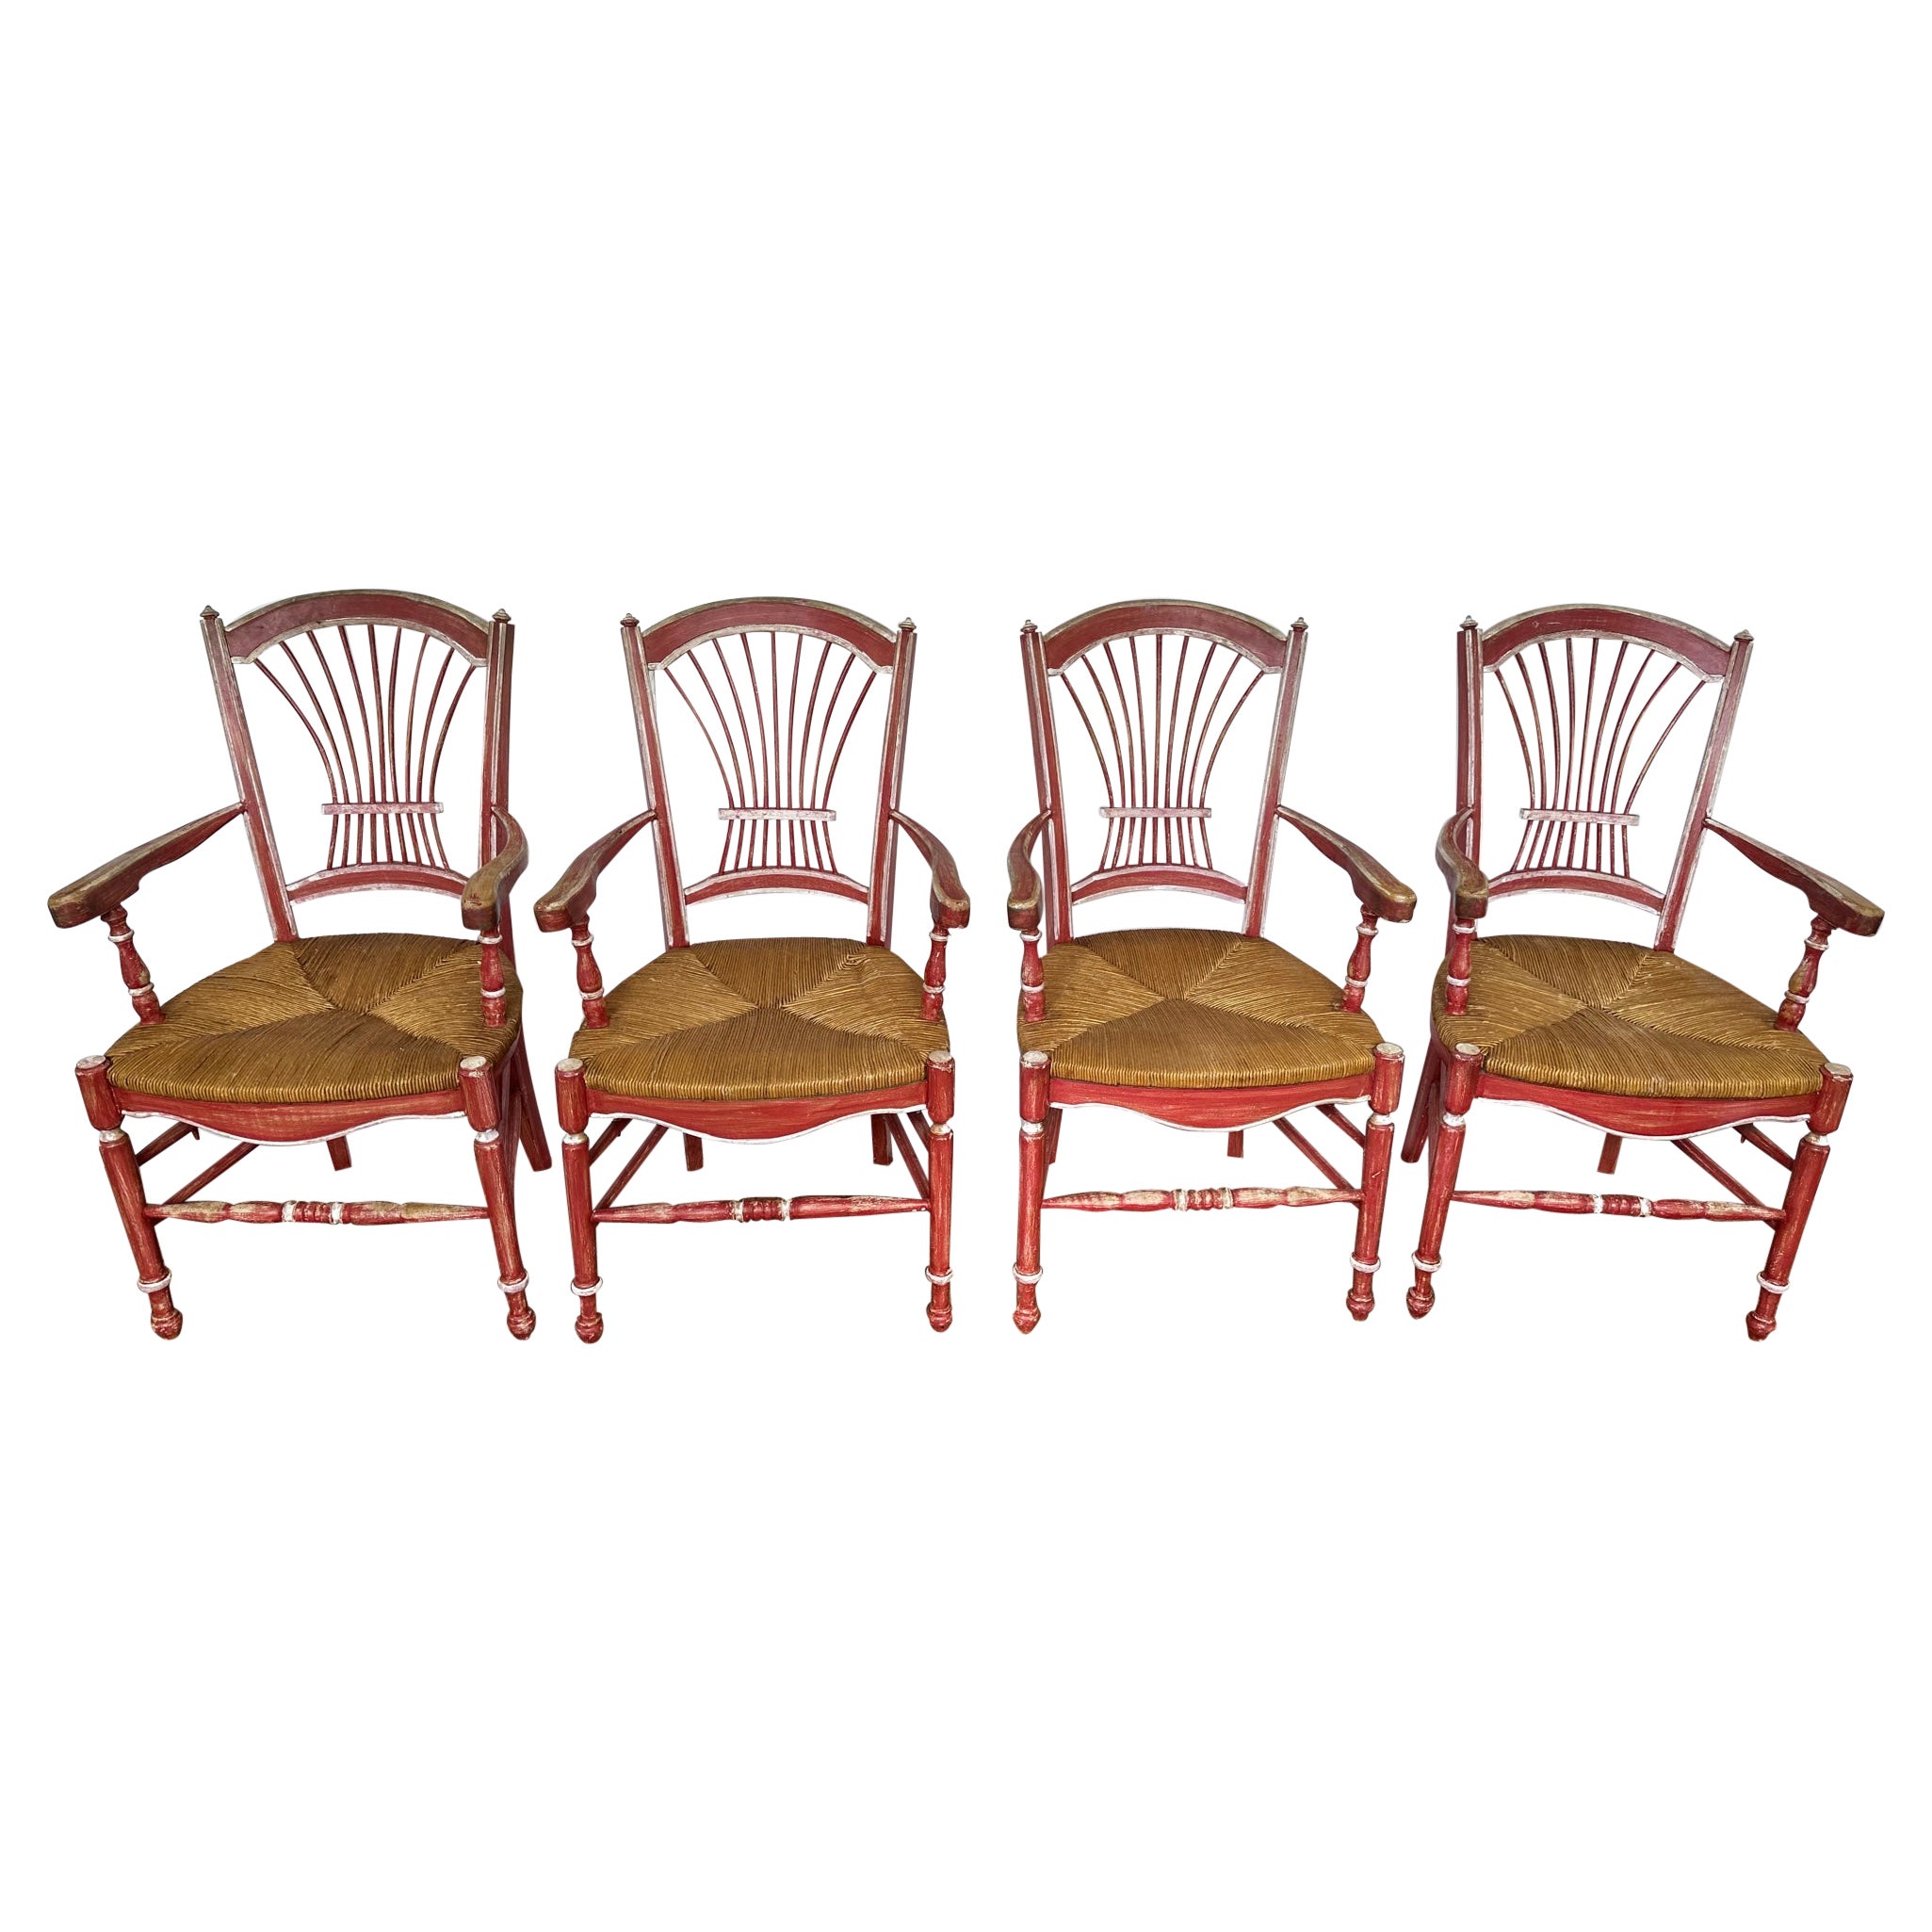 Set of 4 Vintage French Country Red Painted Dining Chairs with Rush Seats For Sale